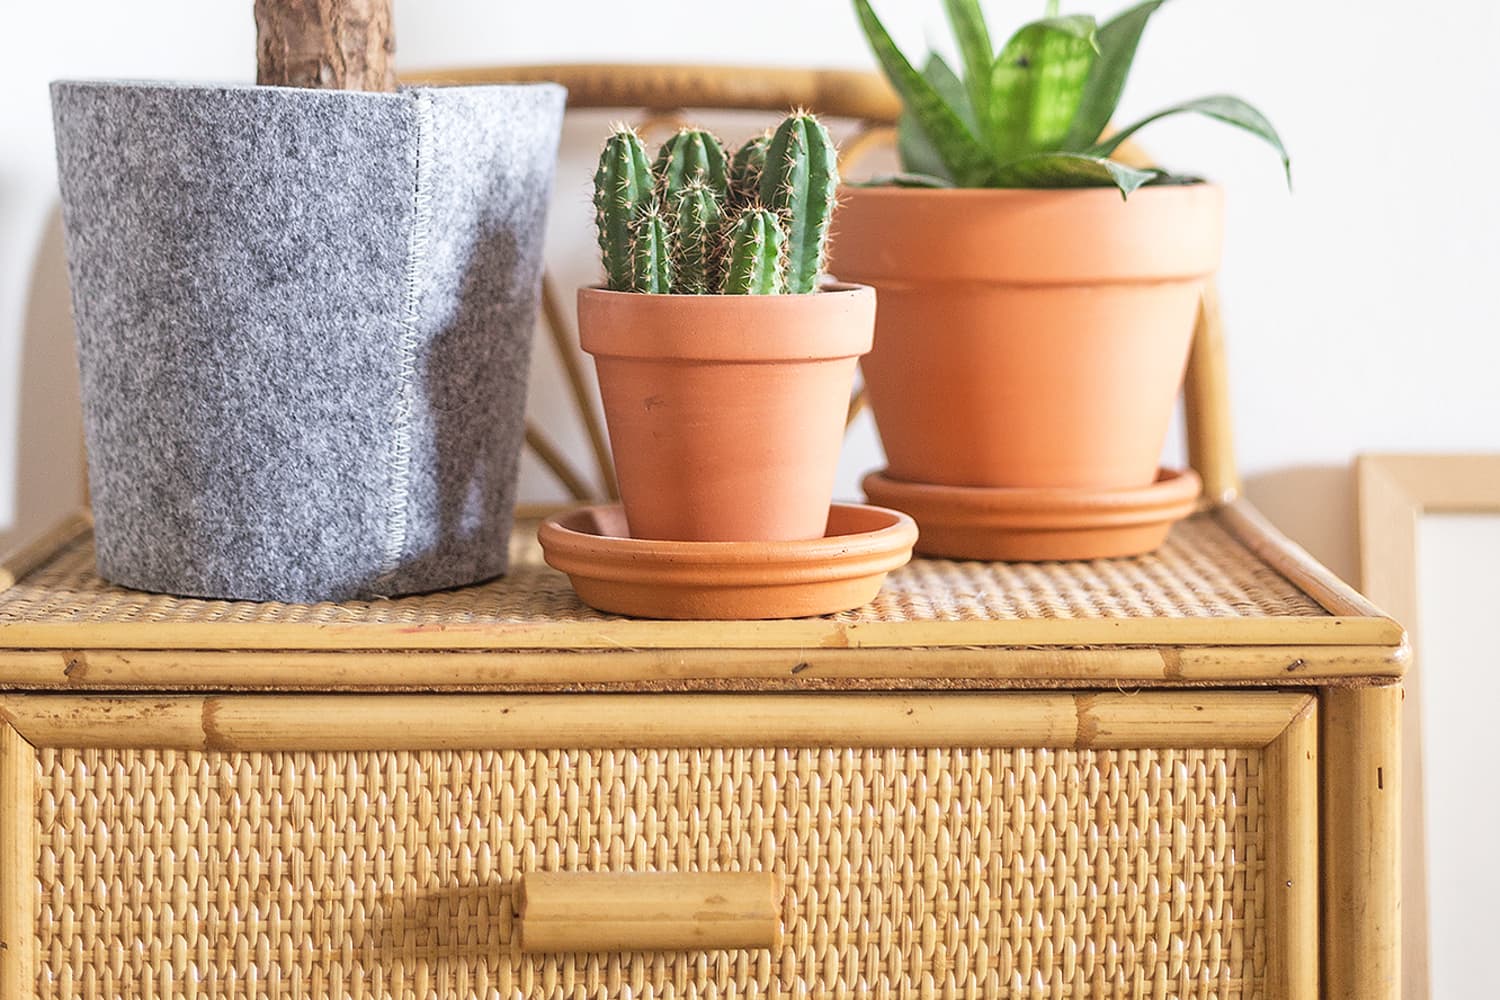 Planters With No Drainage Holes: What to Do? | Apartment Therapy